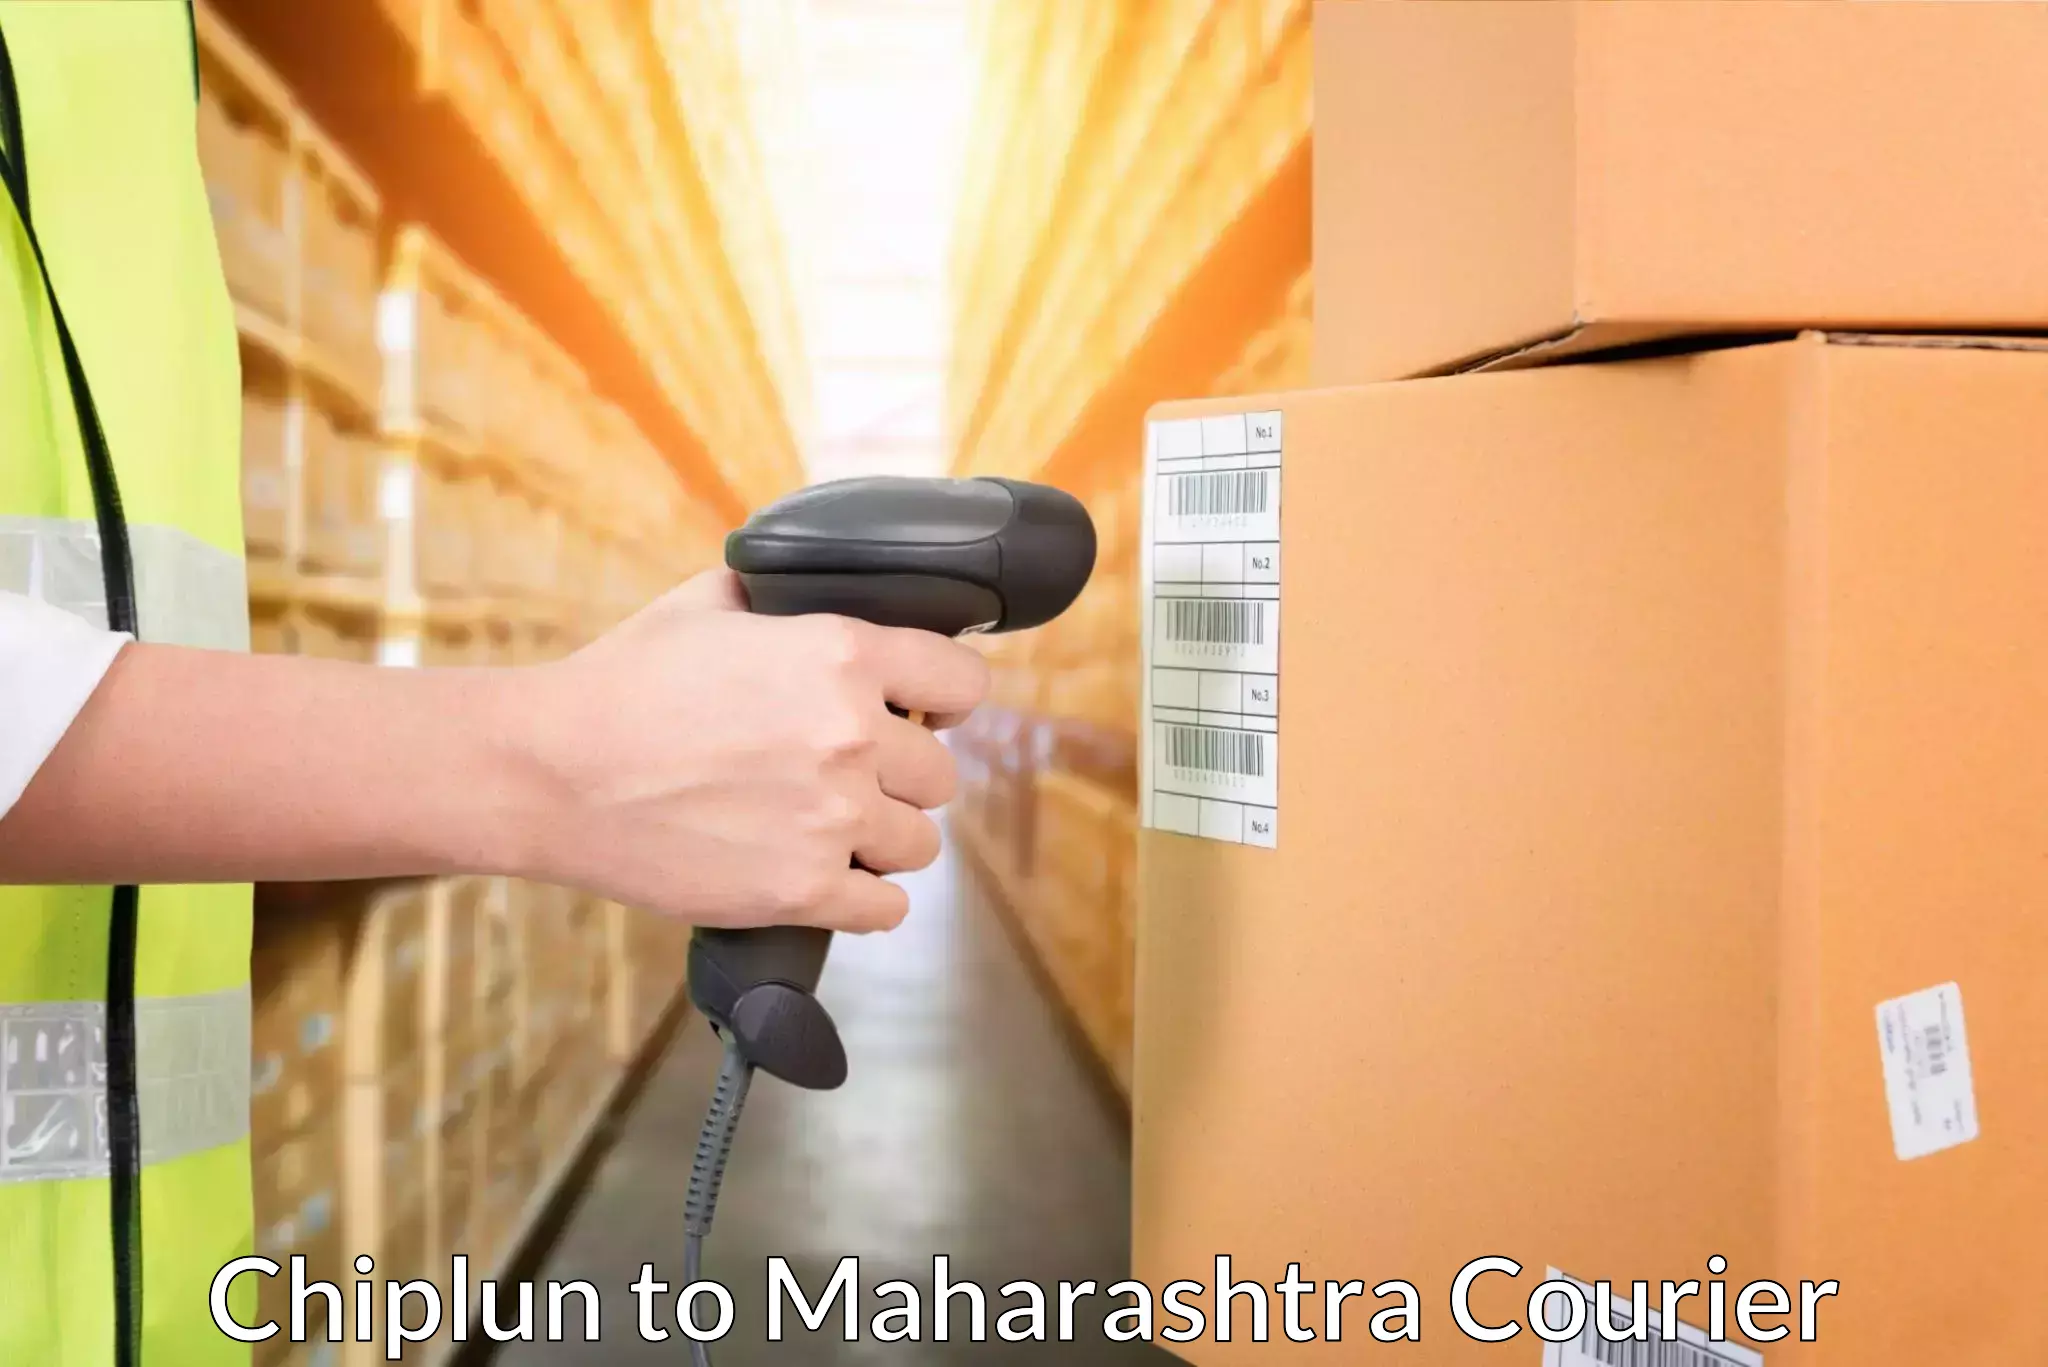 Efficient shipping operations Chiplun to Kalyan Dombivli